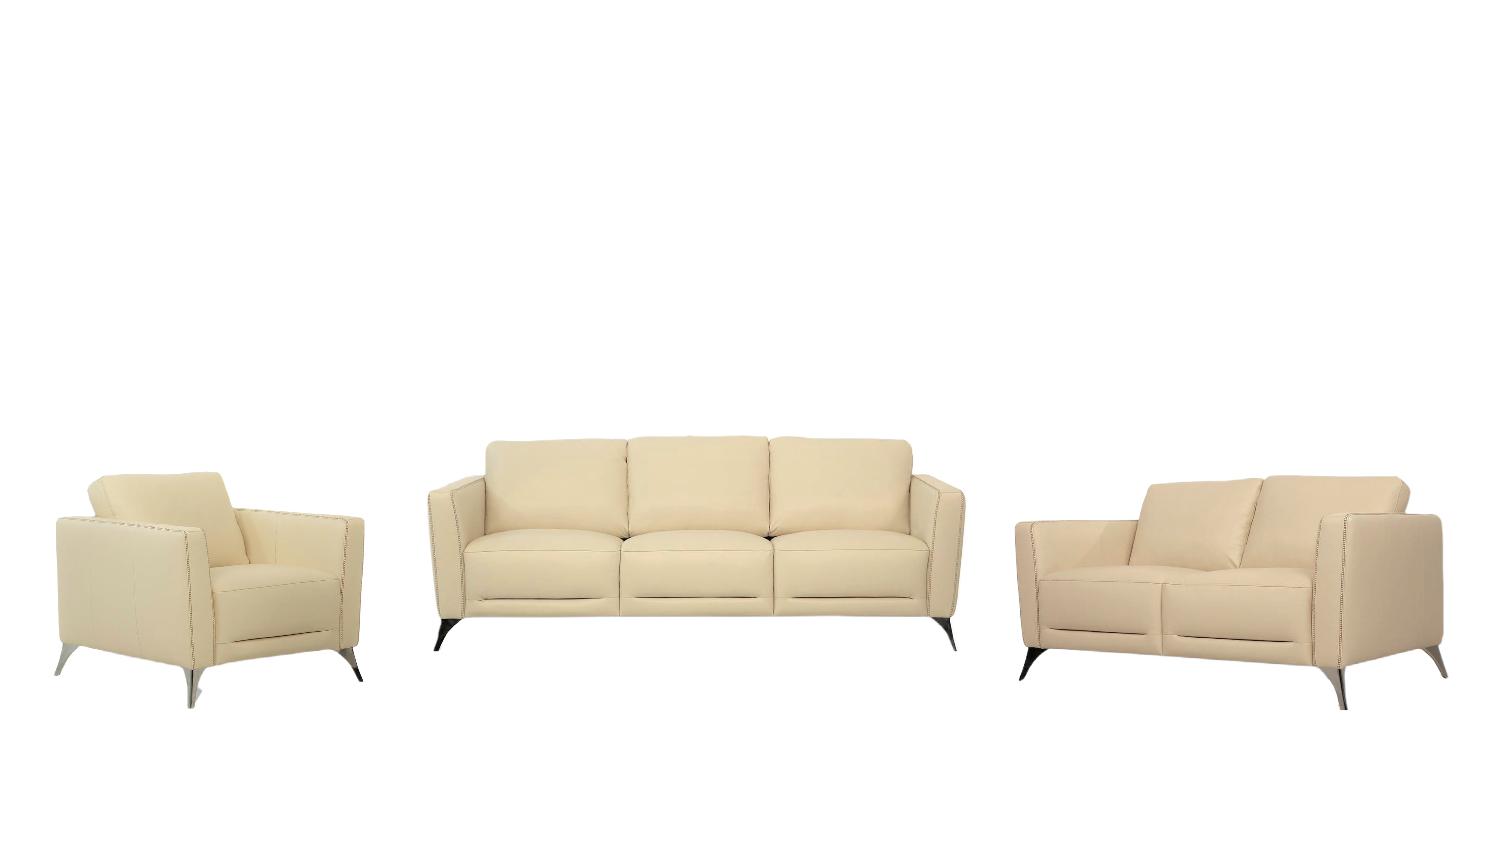 

    
Transitional Cream Leather Sofa + Loveseat + Chair by Acme Malaga 55005-3pcs
